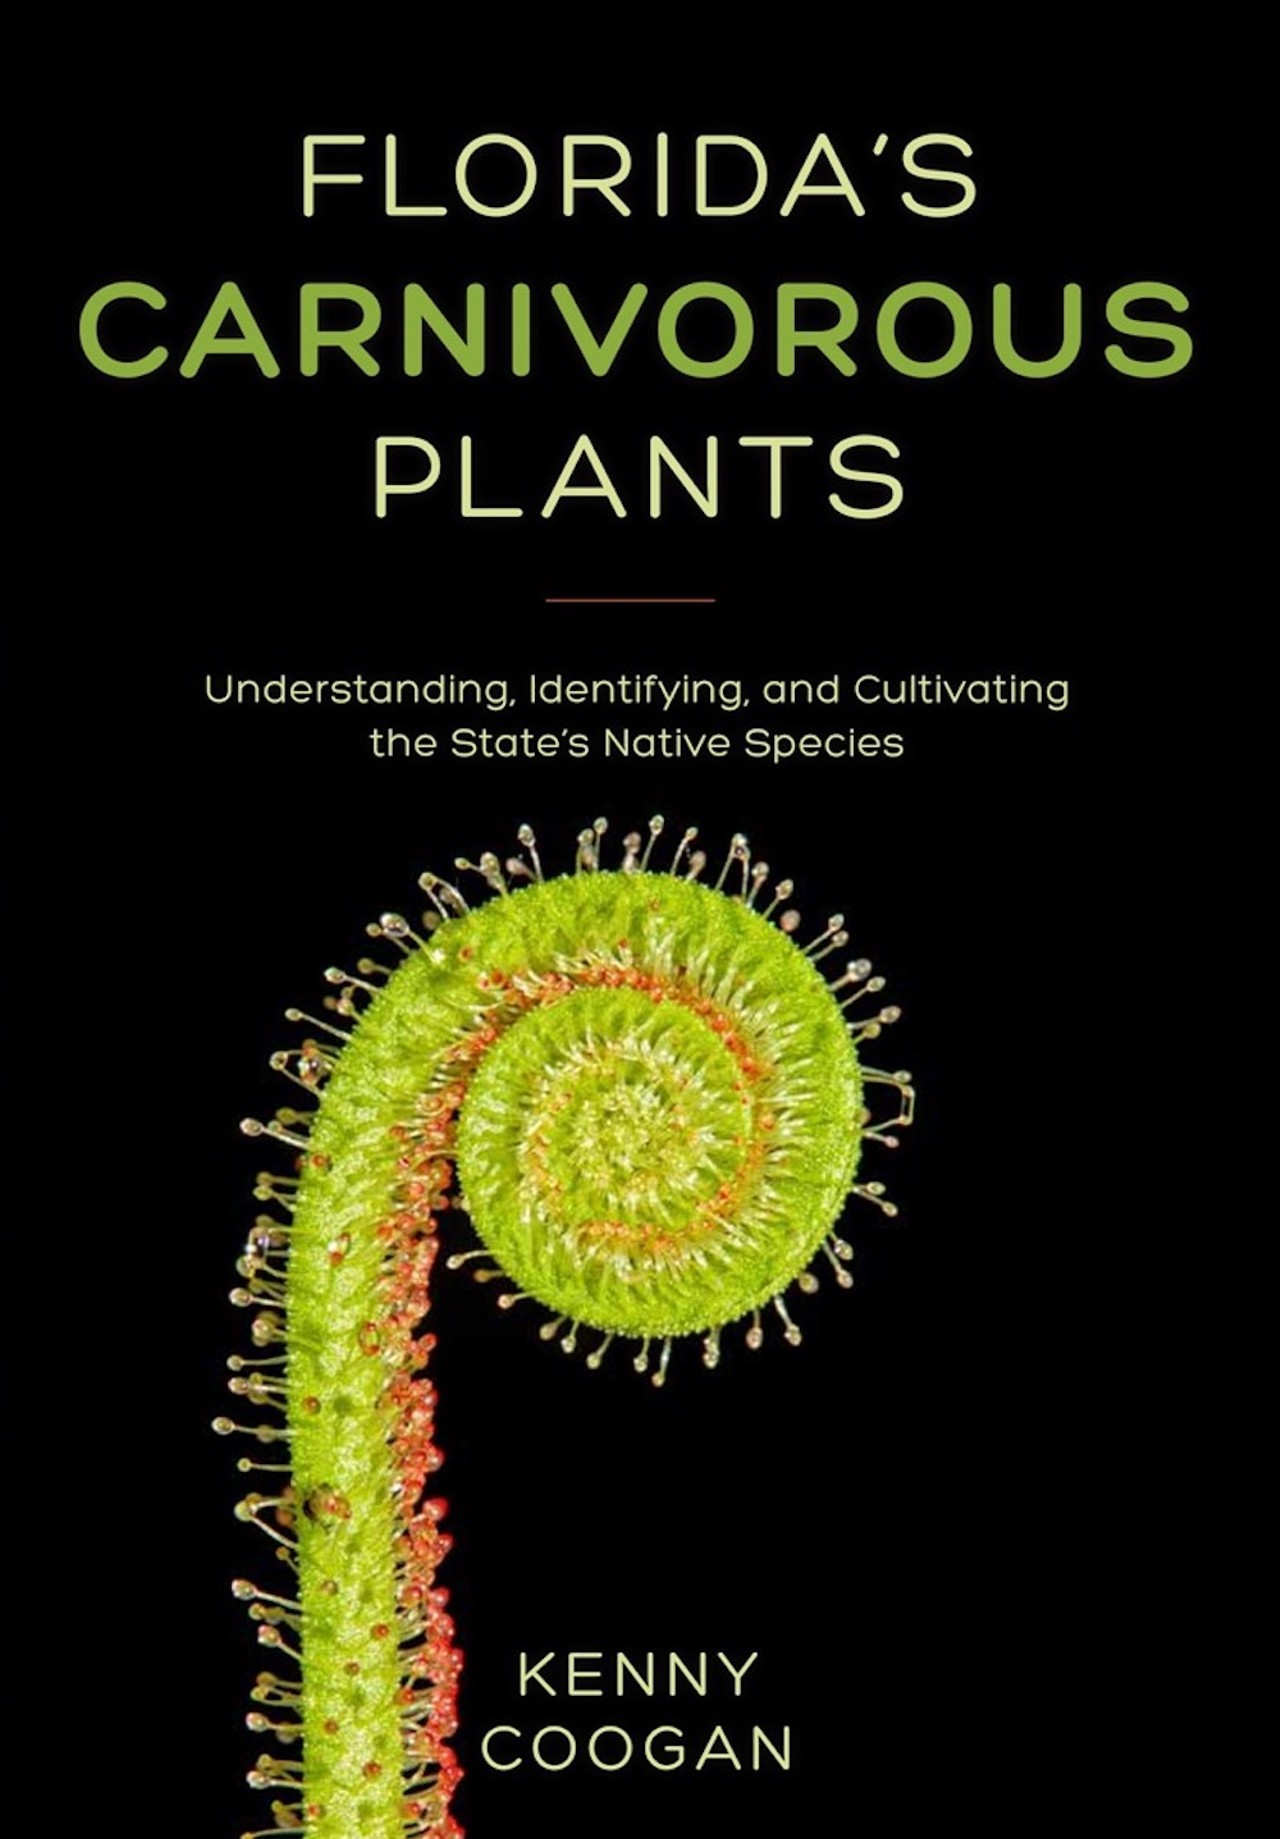 Florida’s Carnivorous Plants: Understanding, Identifying, and Cultivating the State’s Native Species by Kenny Coogan If you thought only Florida’s fauna was frightening, think again! Turns out our native flora is also fucking terrifying. Florida is home to more native carnivorous plants than any other state in the country (pardon?), and those little vampires use appealing scents and sticky fluids to trap their live prey. If bloodthirsty butterworts make your heart pitter-patter, check out this resource book which includes an identification guide, propagation tips, and how to grow at home. FFO: Little Shop of Horrors, Nature’s vulgar and cruel brutality, eccentric gardening. (Pineapple Press, $22.95) 